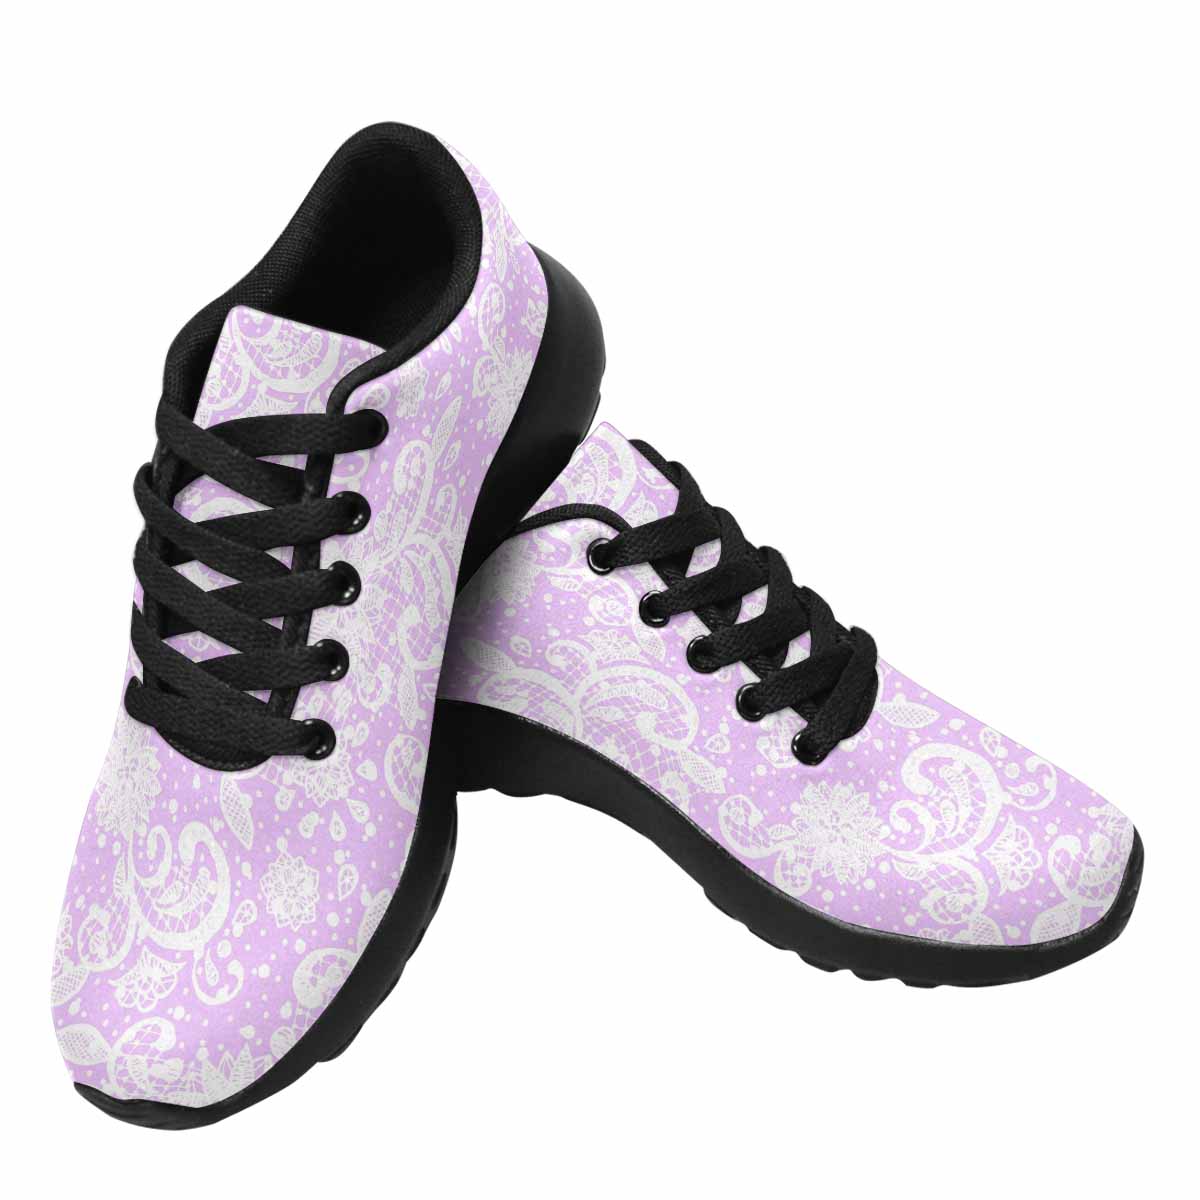 Victorian lace print, womens cute casual or running sneakers, design 06